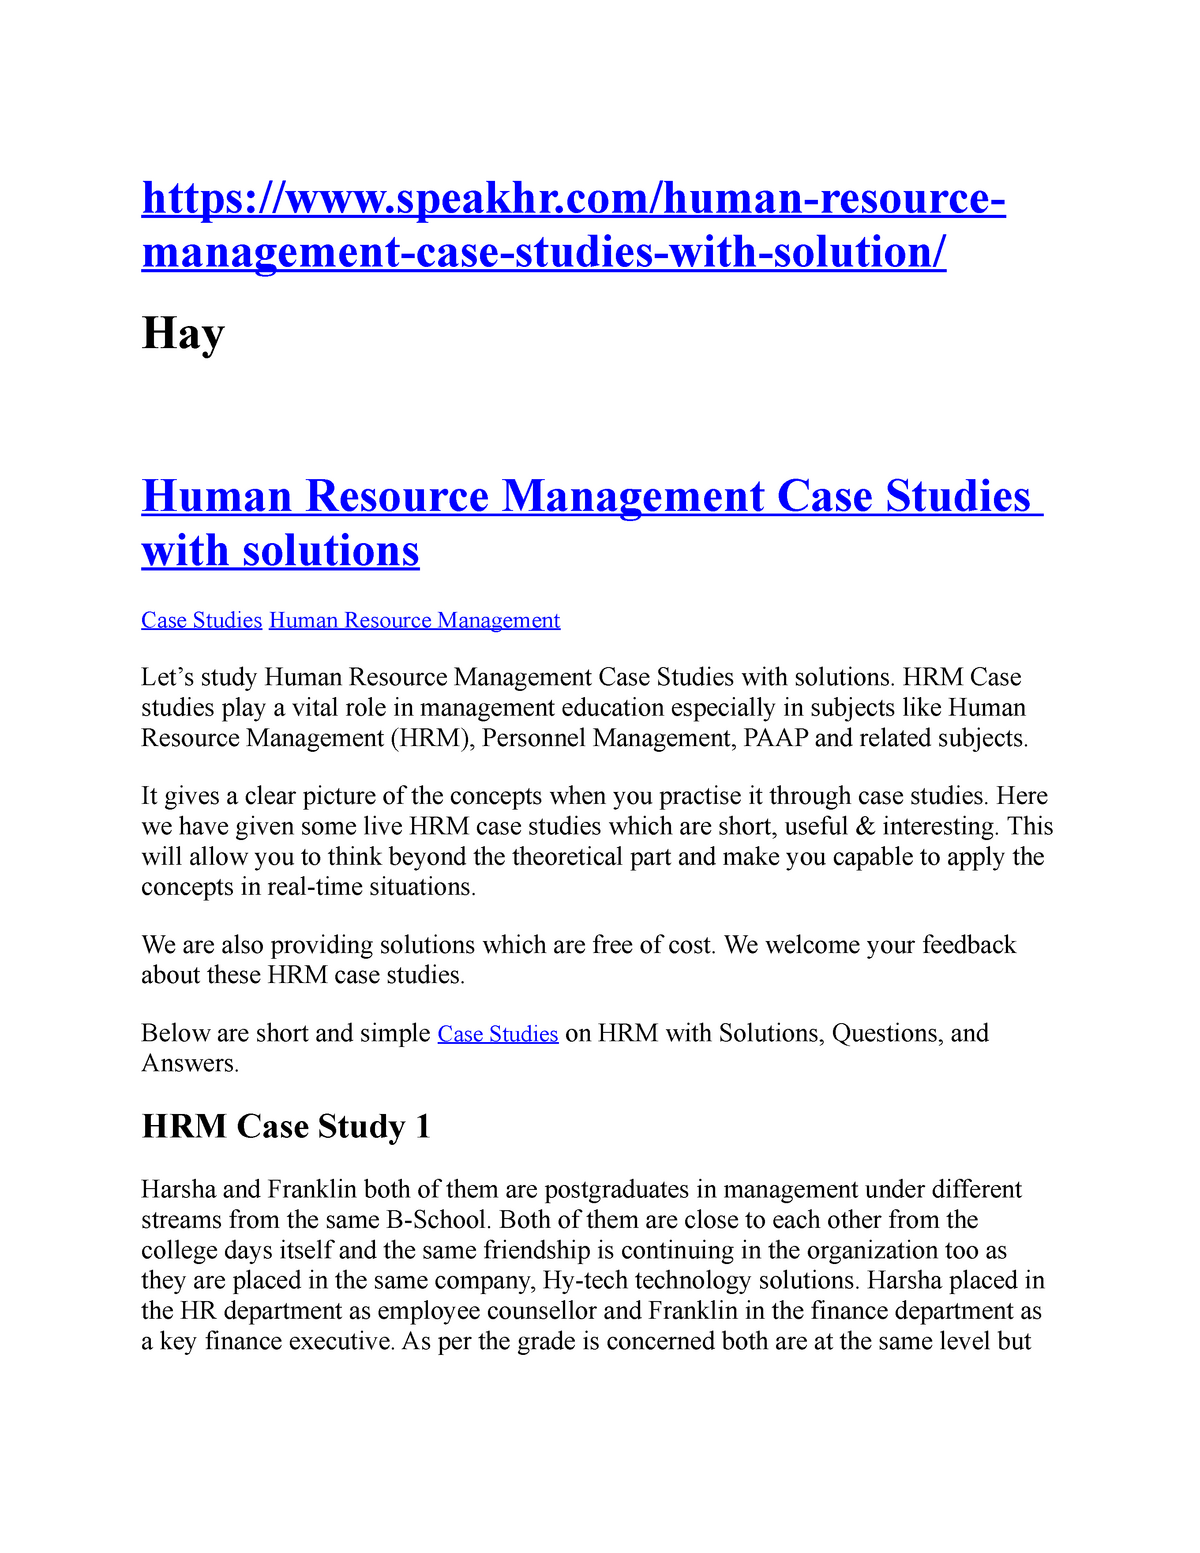 case study human resource management with solution